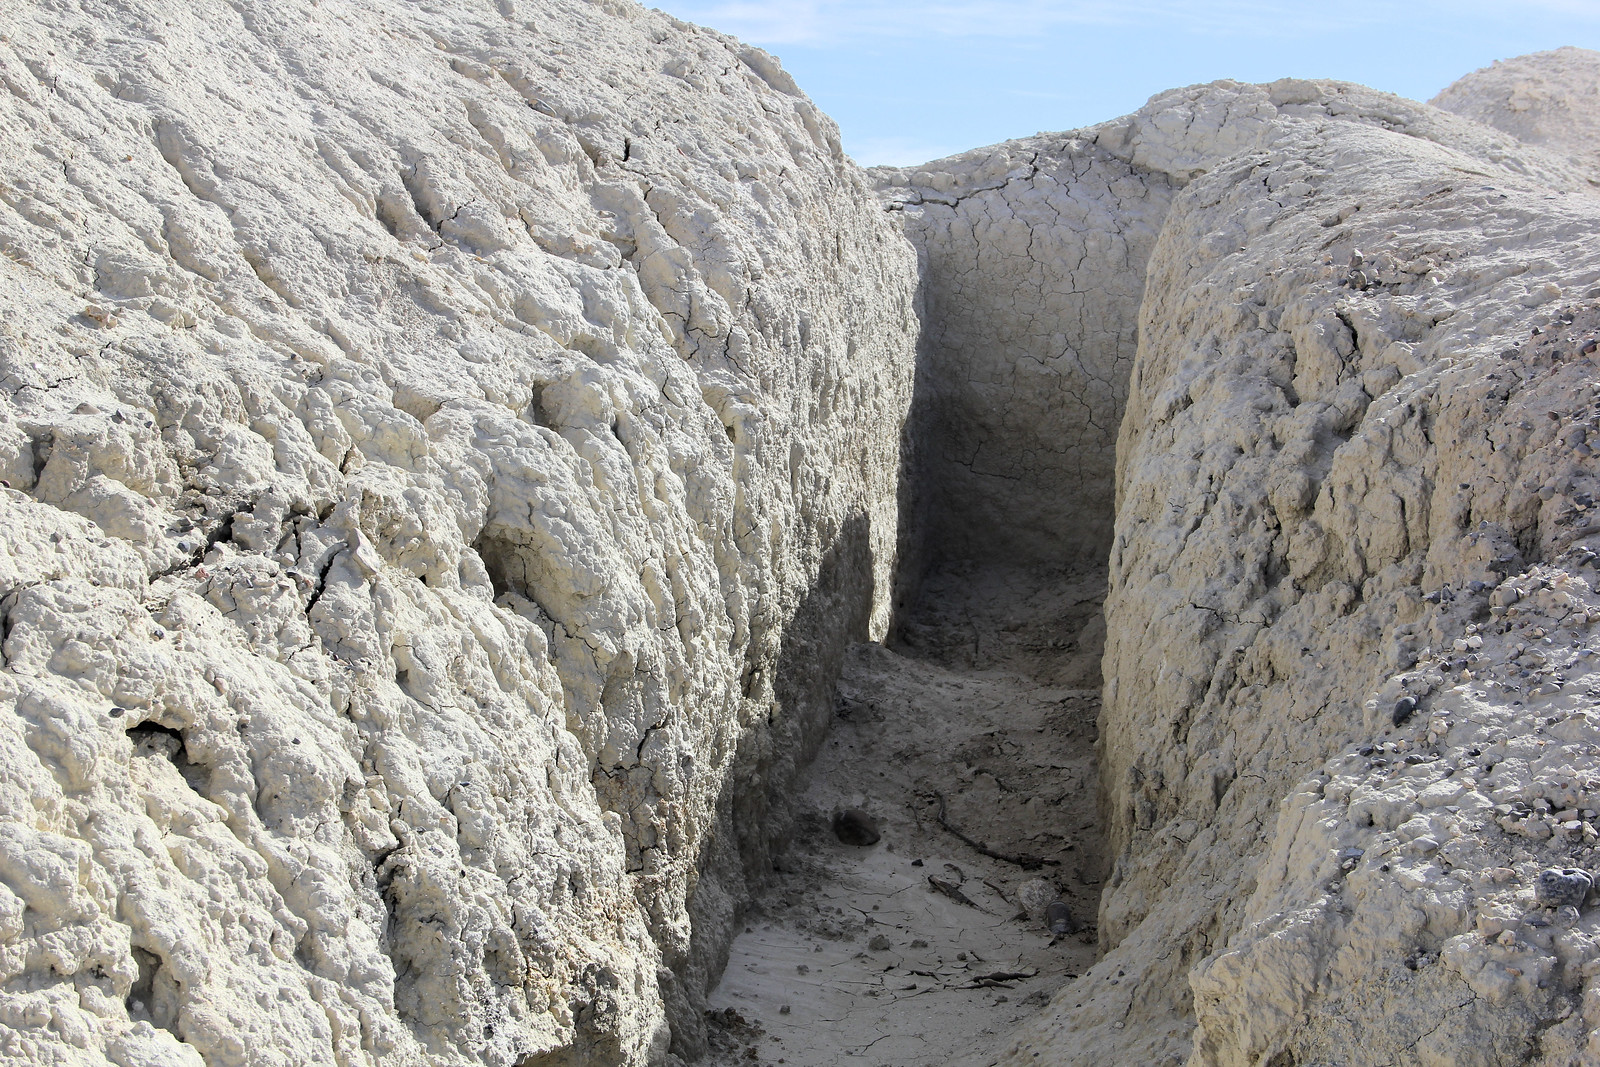 Photograph of a narrow, deep trench with a flat bottom dug into very dry, off-white sediment at Tule Springs.